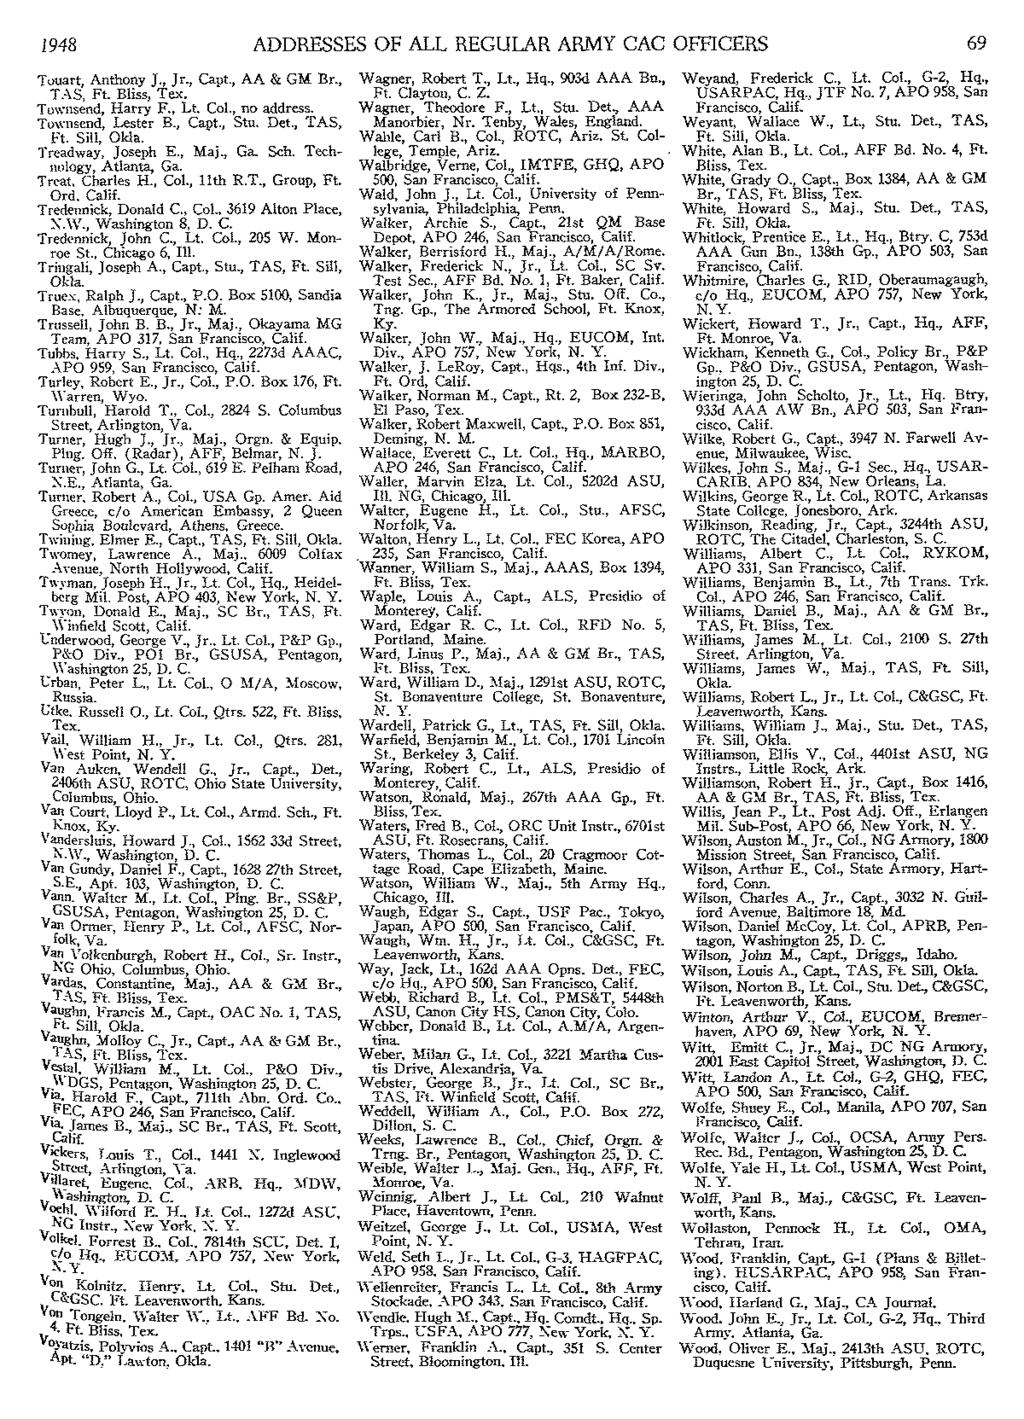 1948 ADDRESSES OF ALL REGULAR ARMY CAC OffiCERS 69 Touart, Anthony J., Jr., Capt., AA & GM Br., TAS, Ft. Bliss, Tex. Townsend, Harry F., Lt. Col., no address. Townsend, Lester B., Capt., Stu. Det.